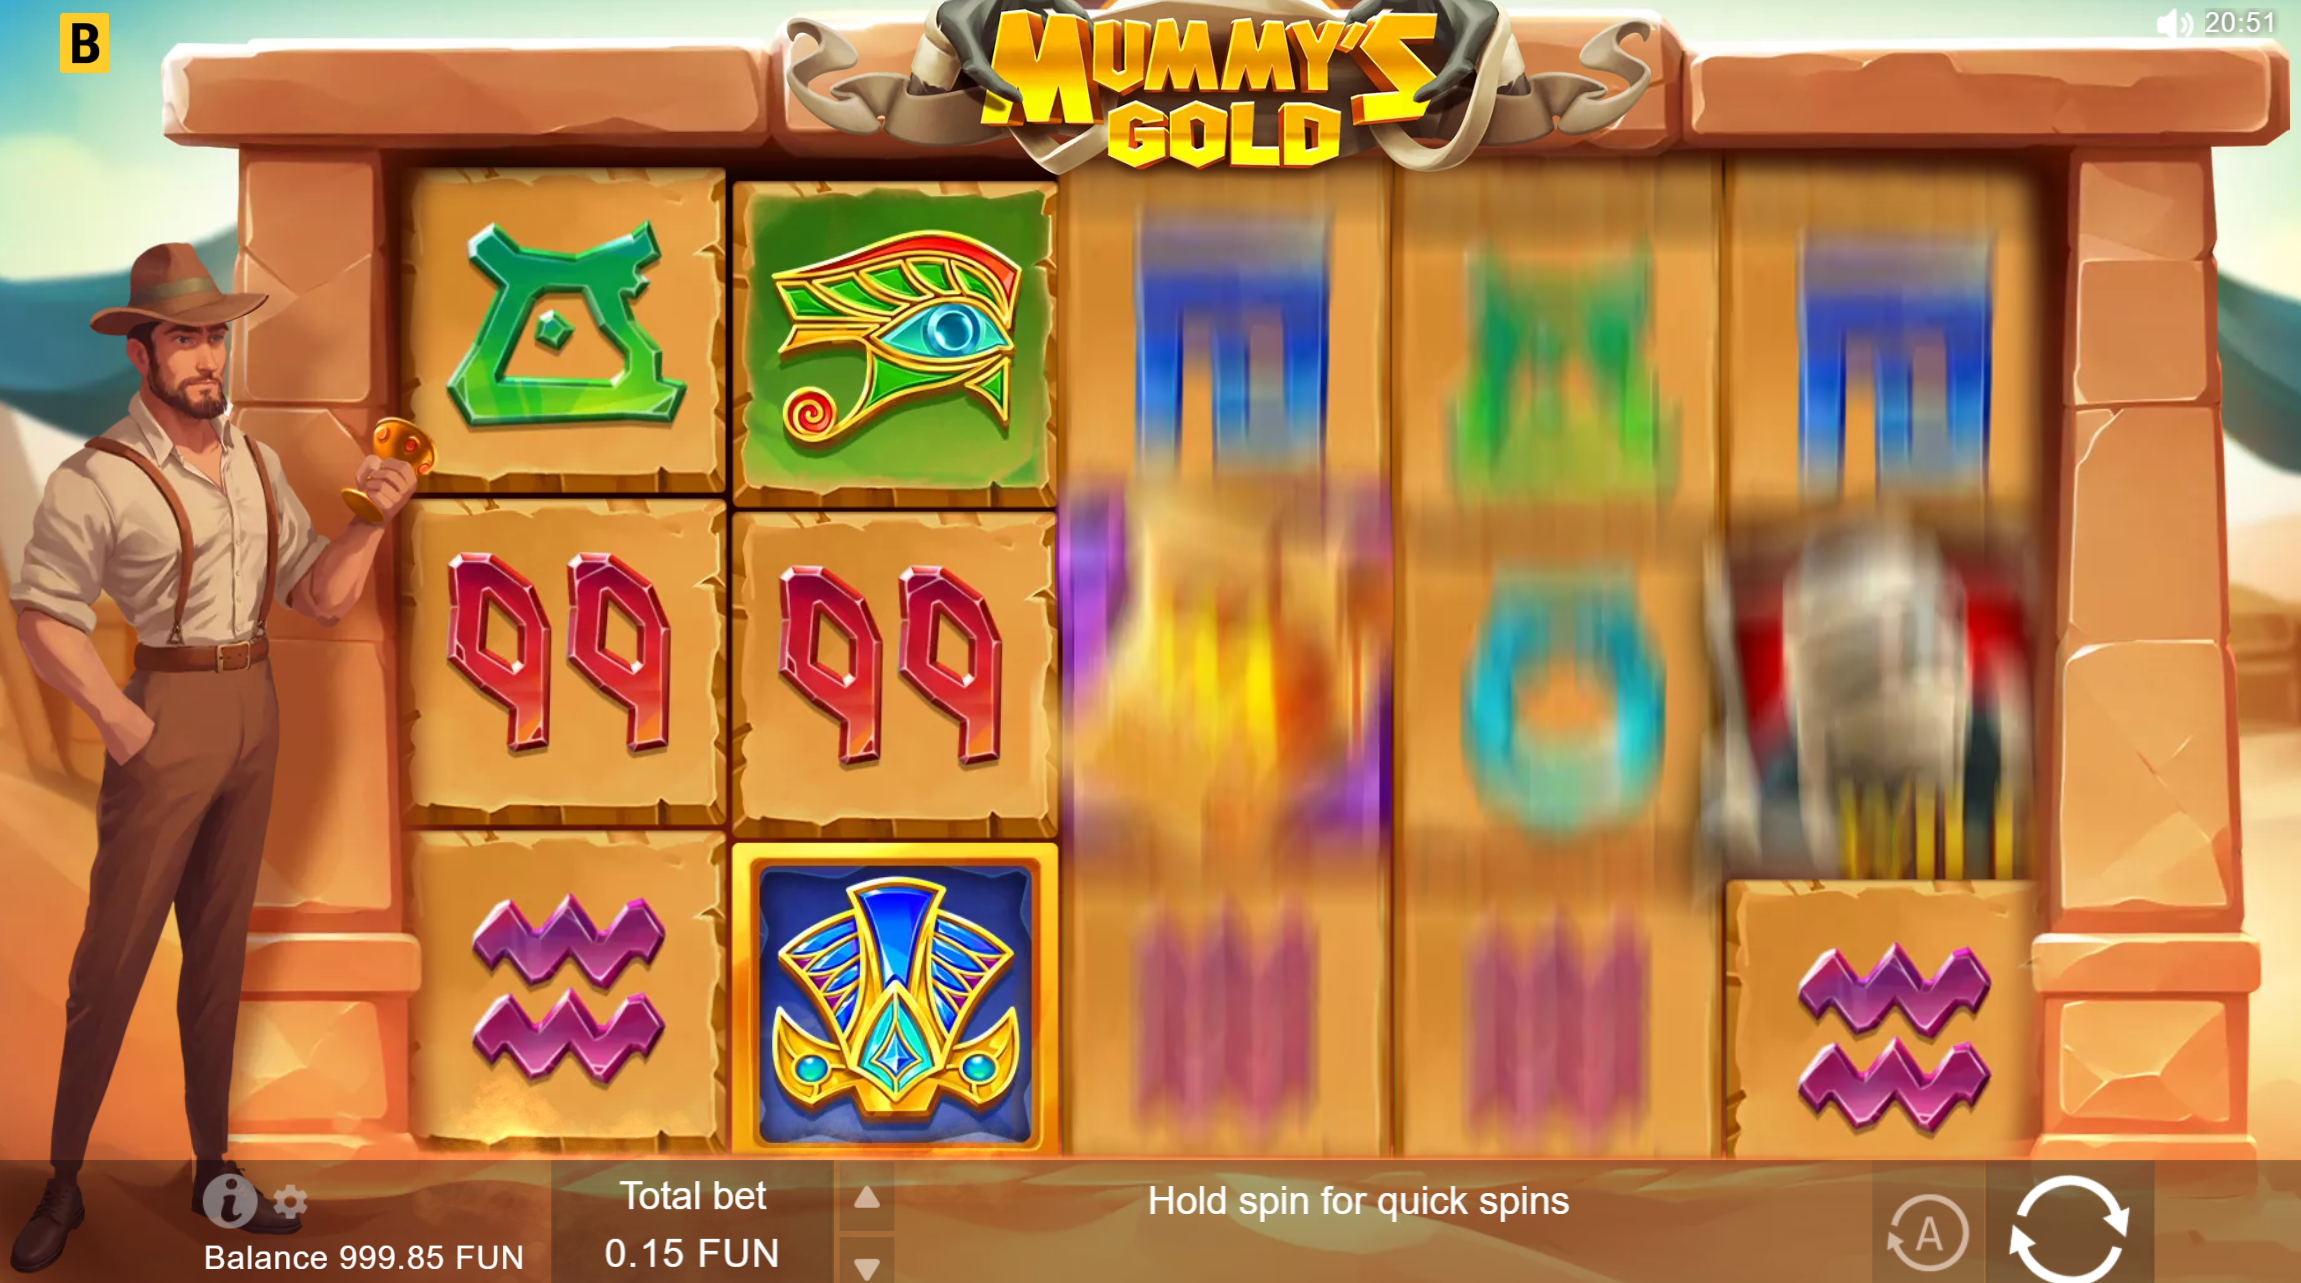 Mummy’s Gold Slot has 5 x 3 reel design, 15 fixed pay lines